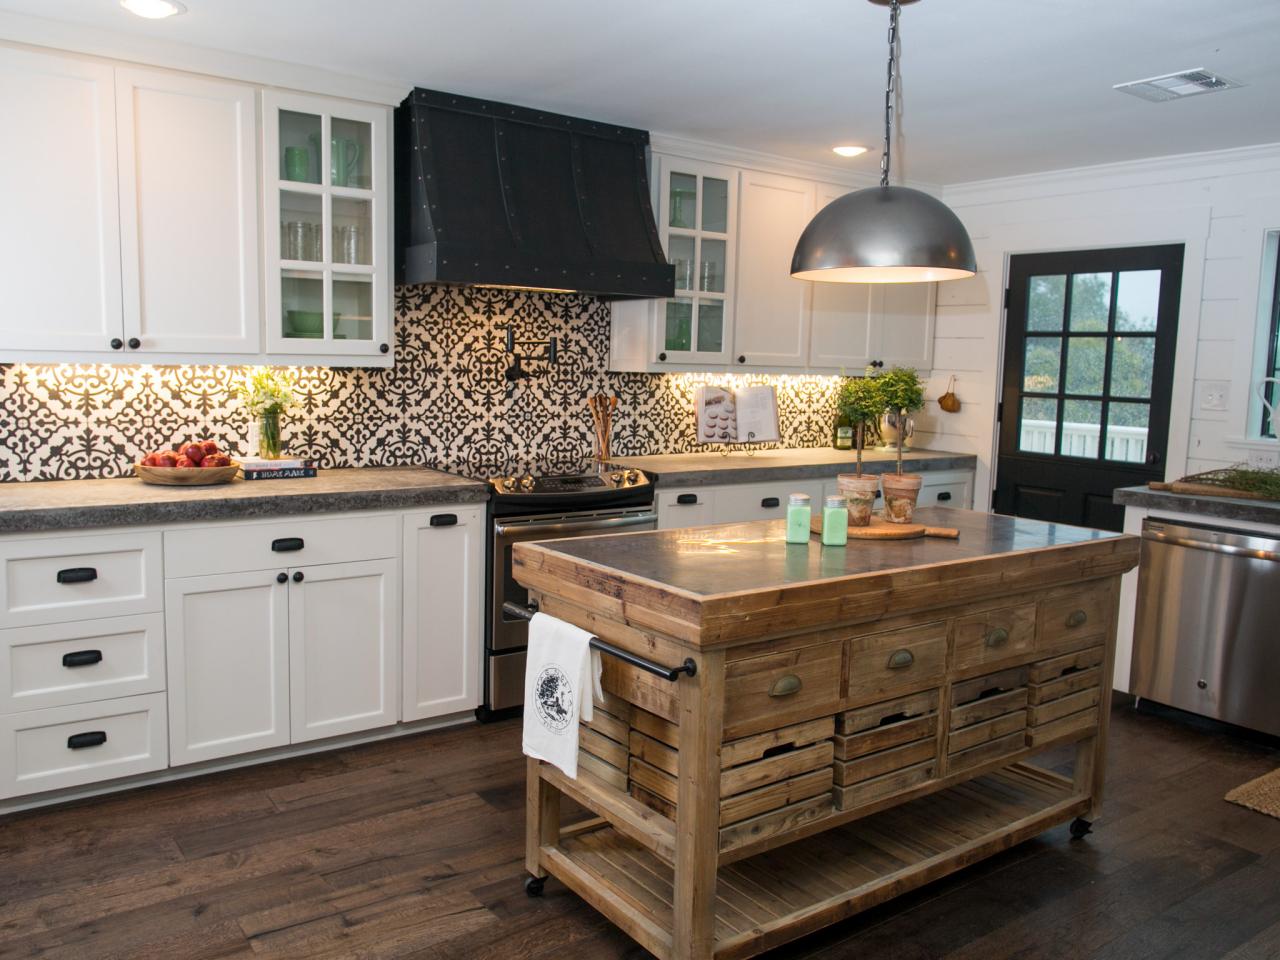 Before and After Kitchen Photos From HGTV's Fixer Upper | HGTV's